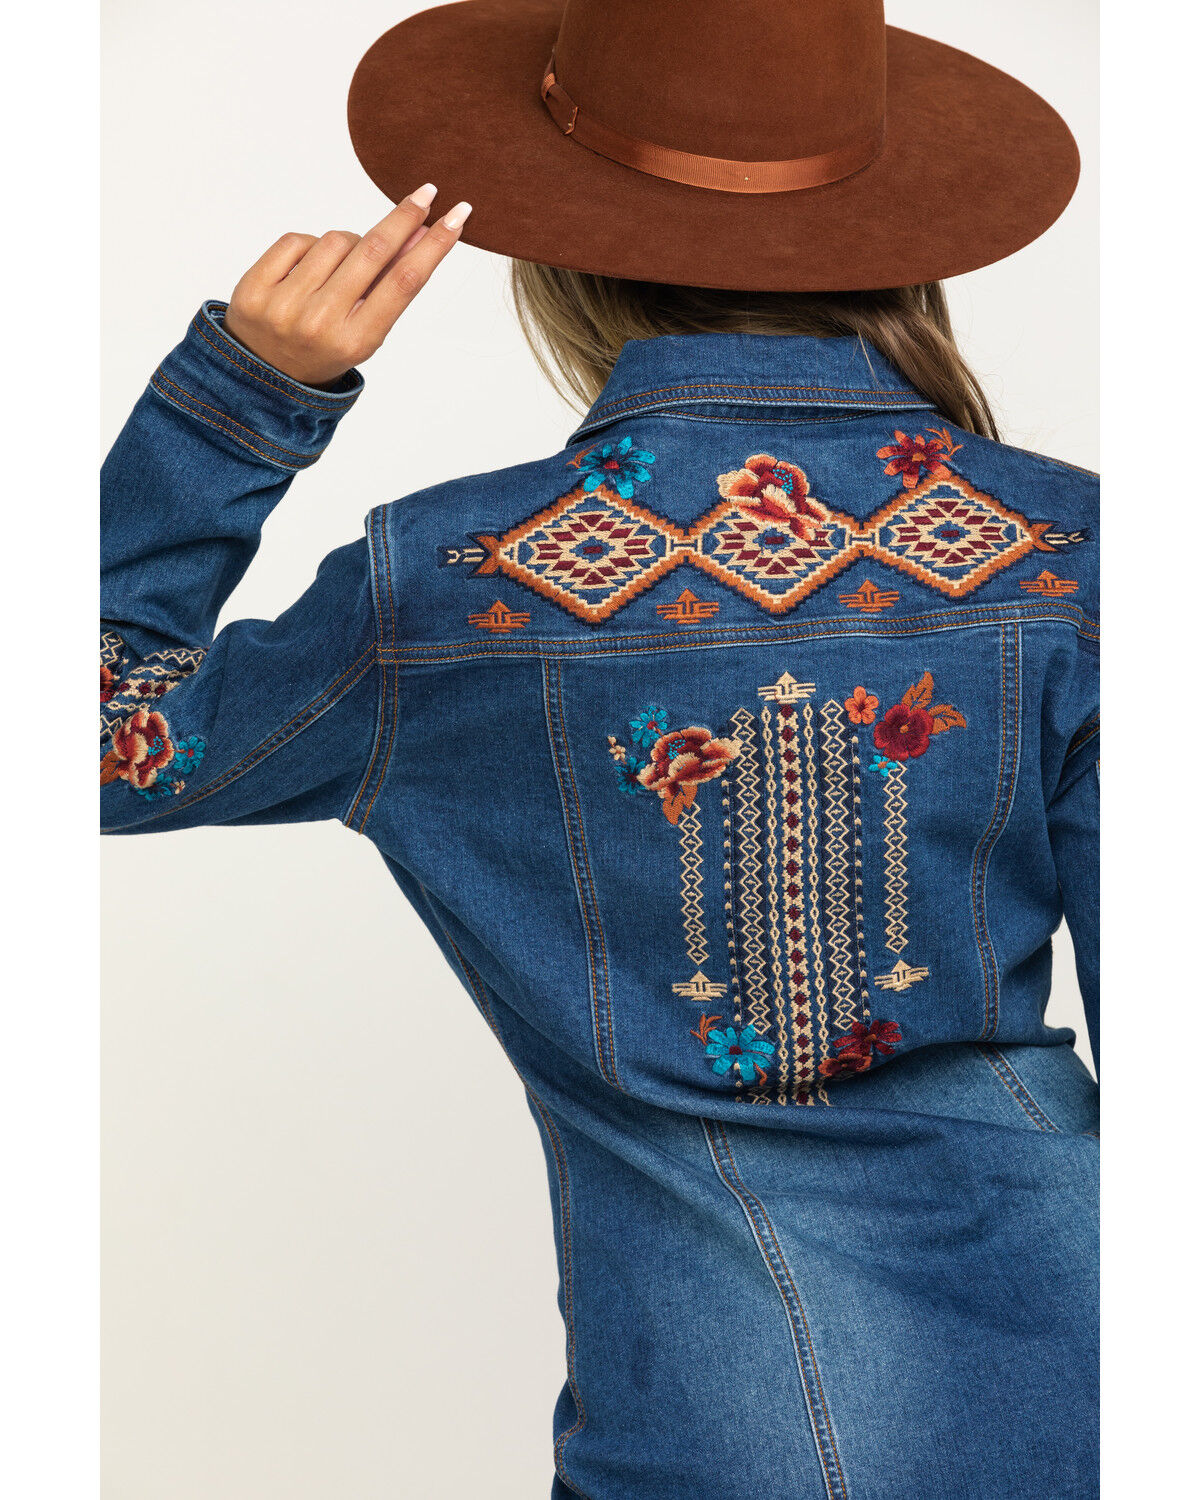 embroidered jeans jacket